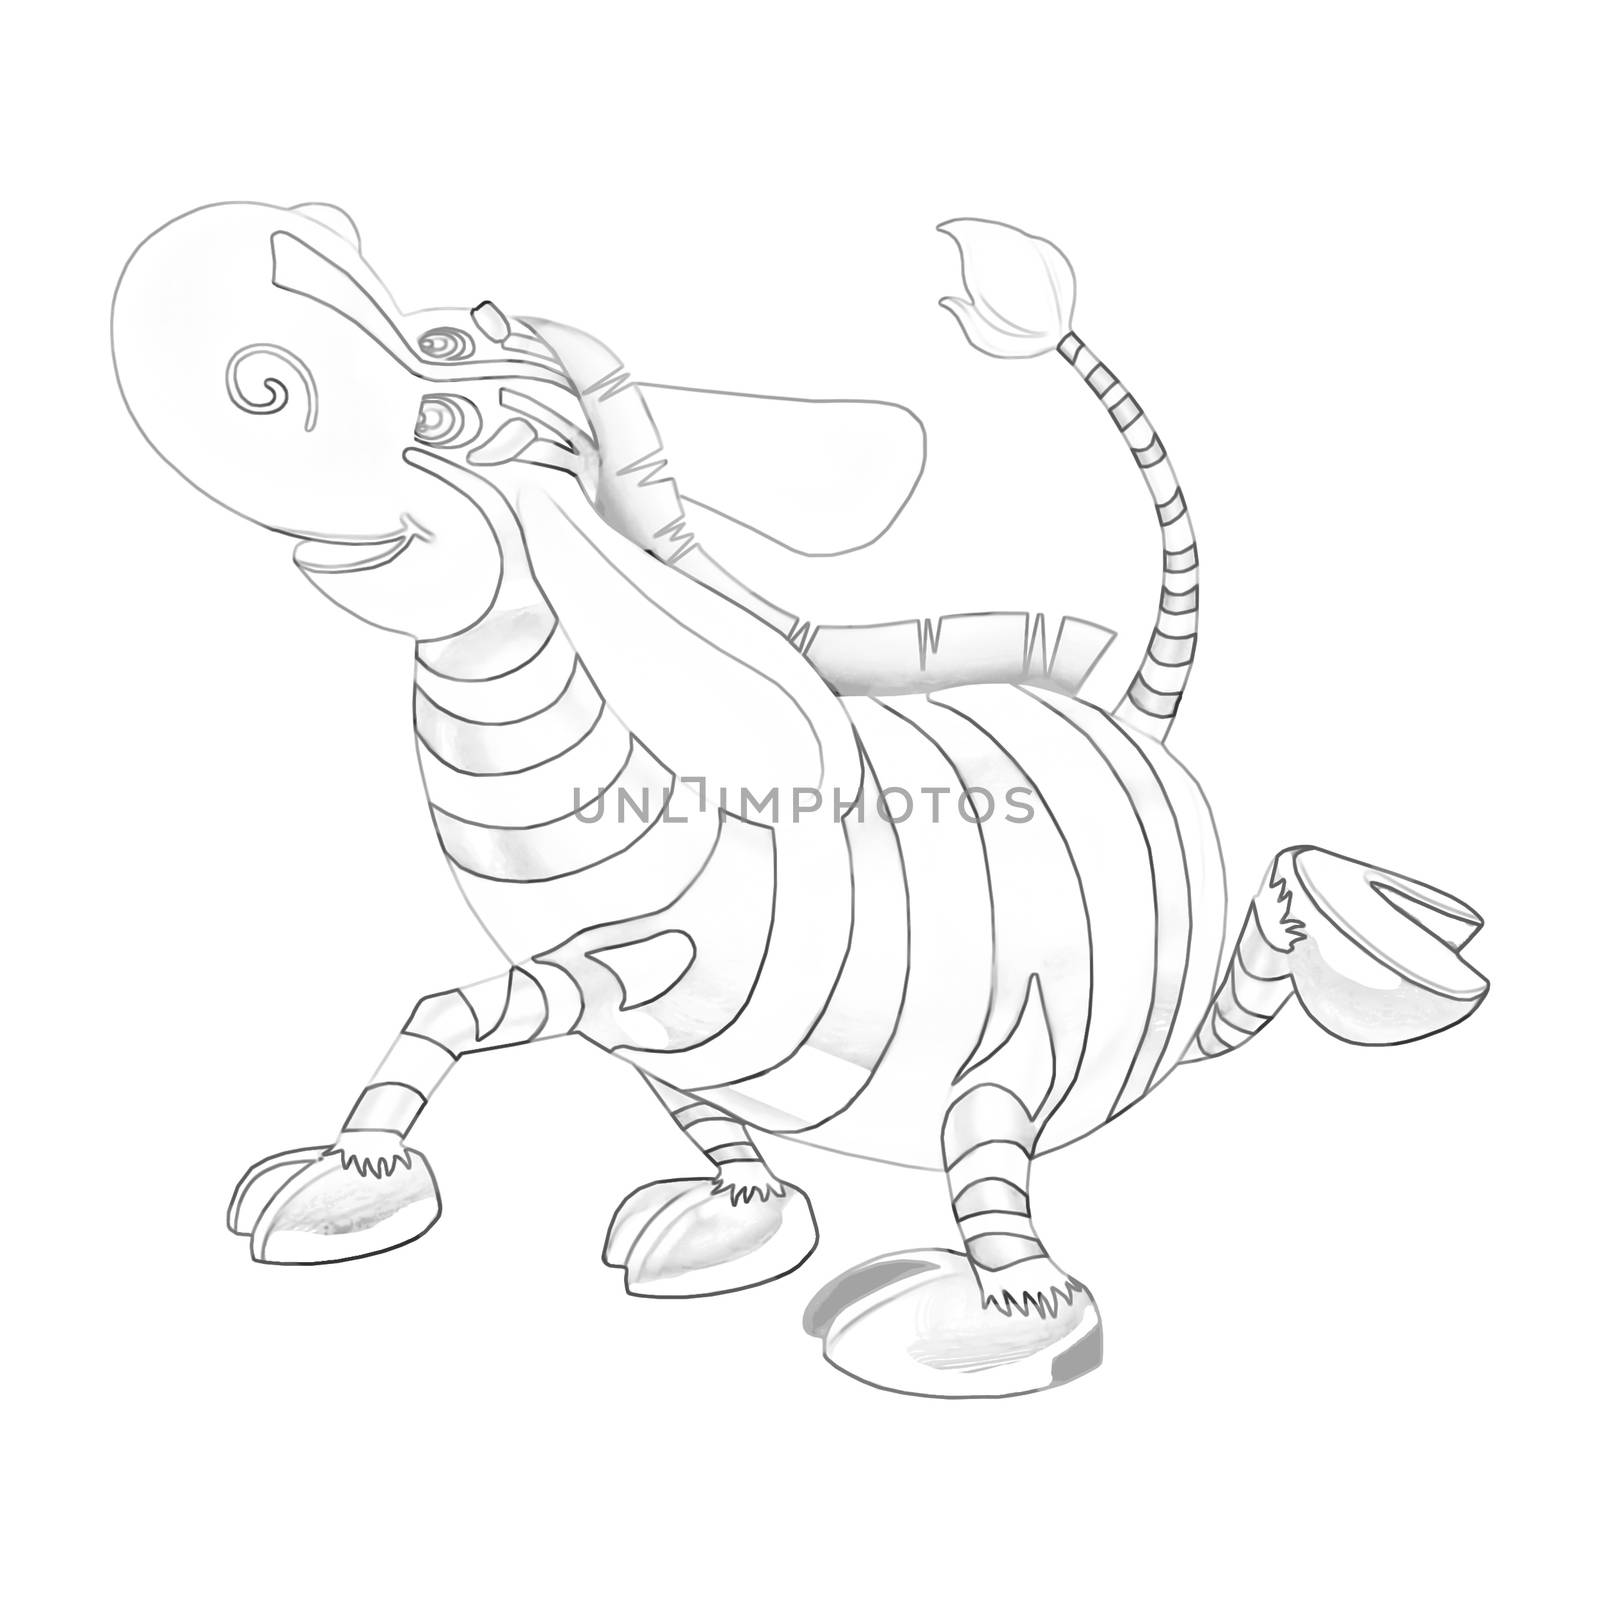 Illustration: Coloring Book Series: Naughty Zebra. Soft line. Print it and bring it to Life with Color! Fantastic Outline / Sketch / Line Art Design.